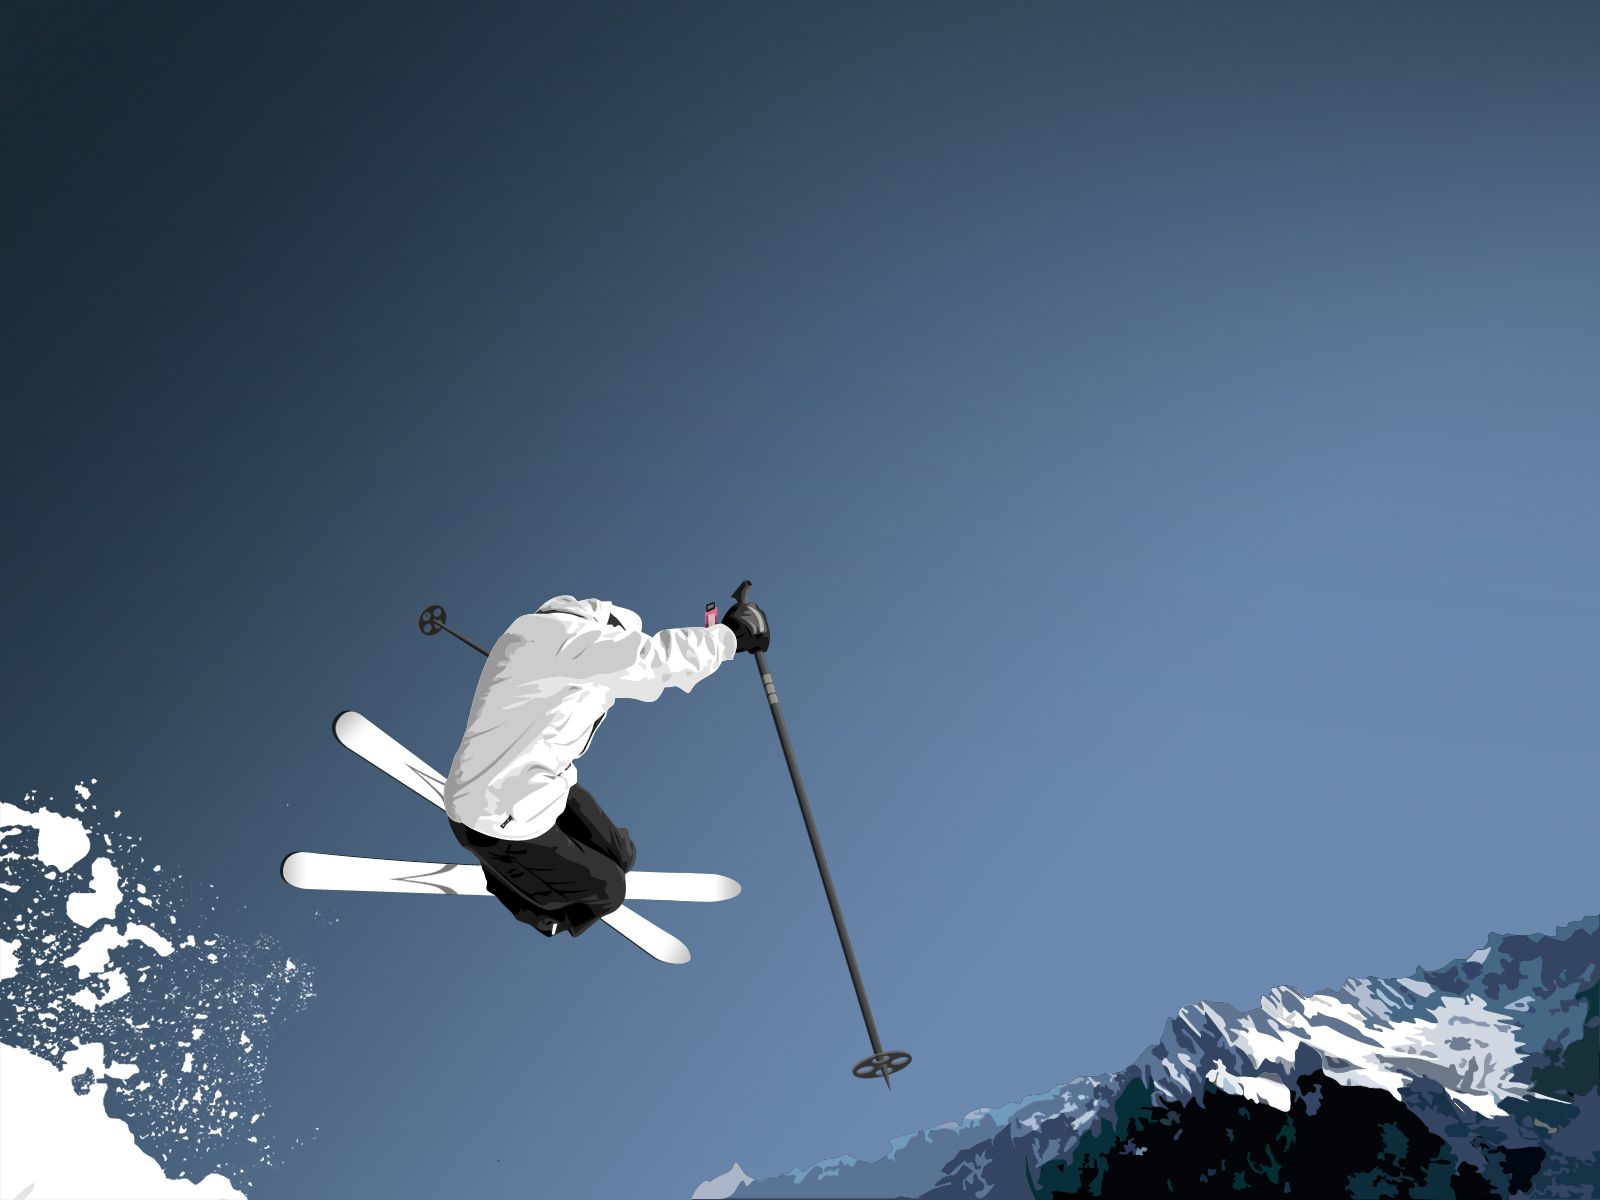 Jumping ski snow wallpaper - - High Quality and other